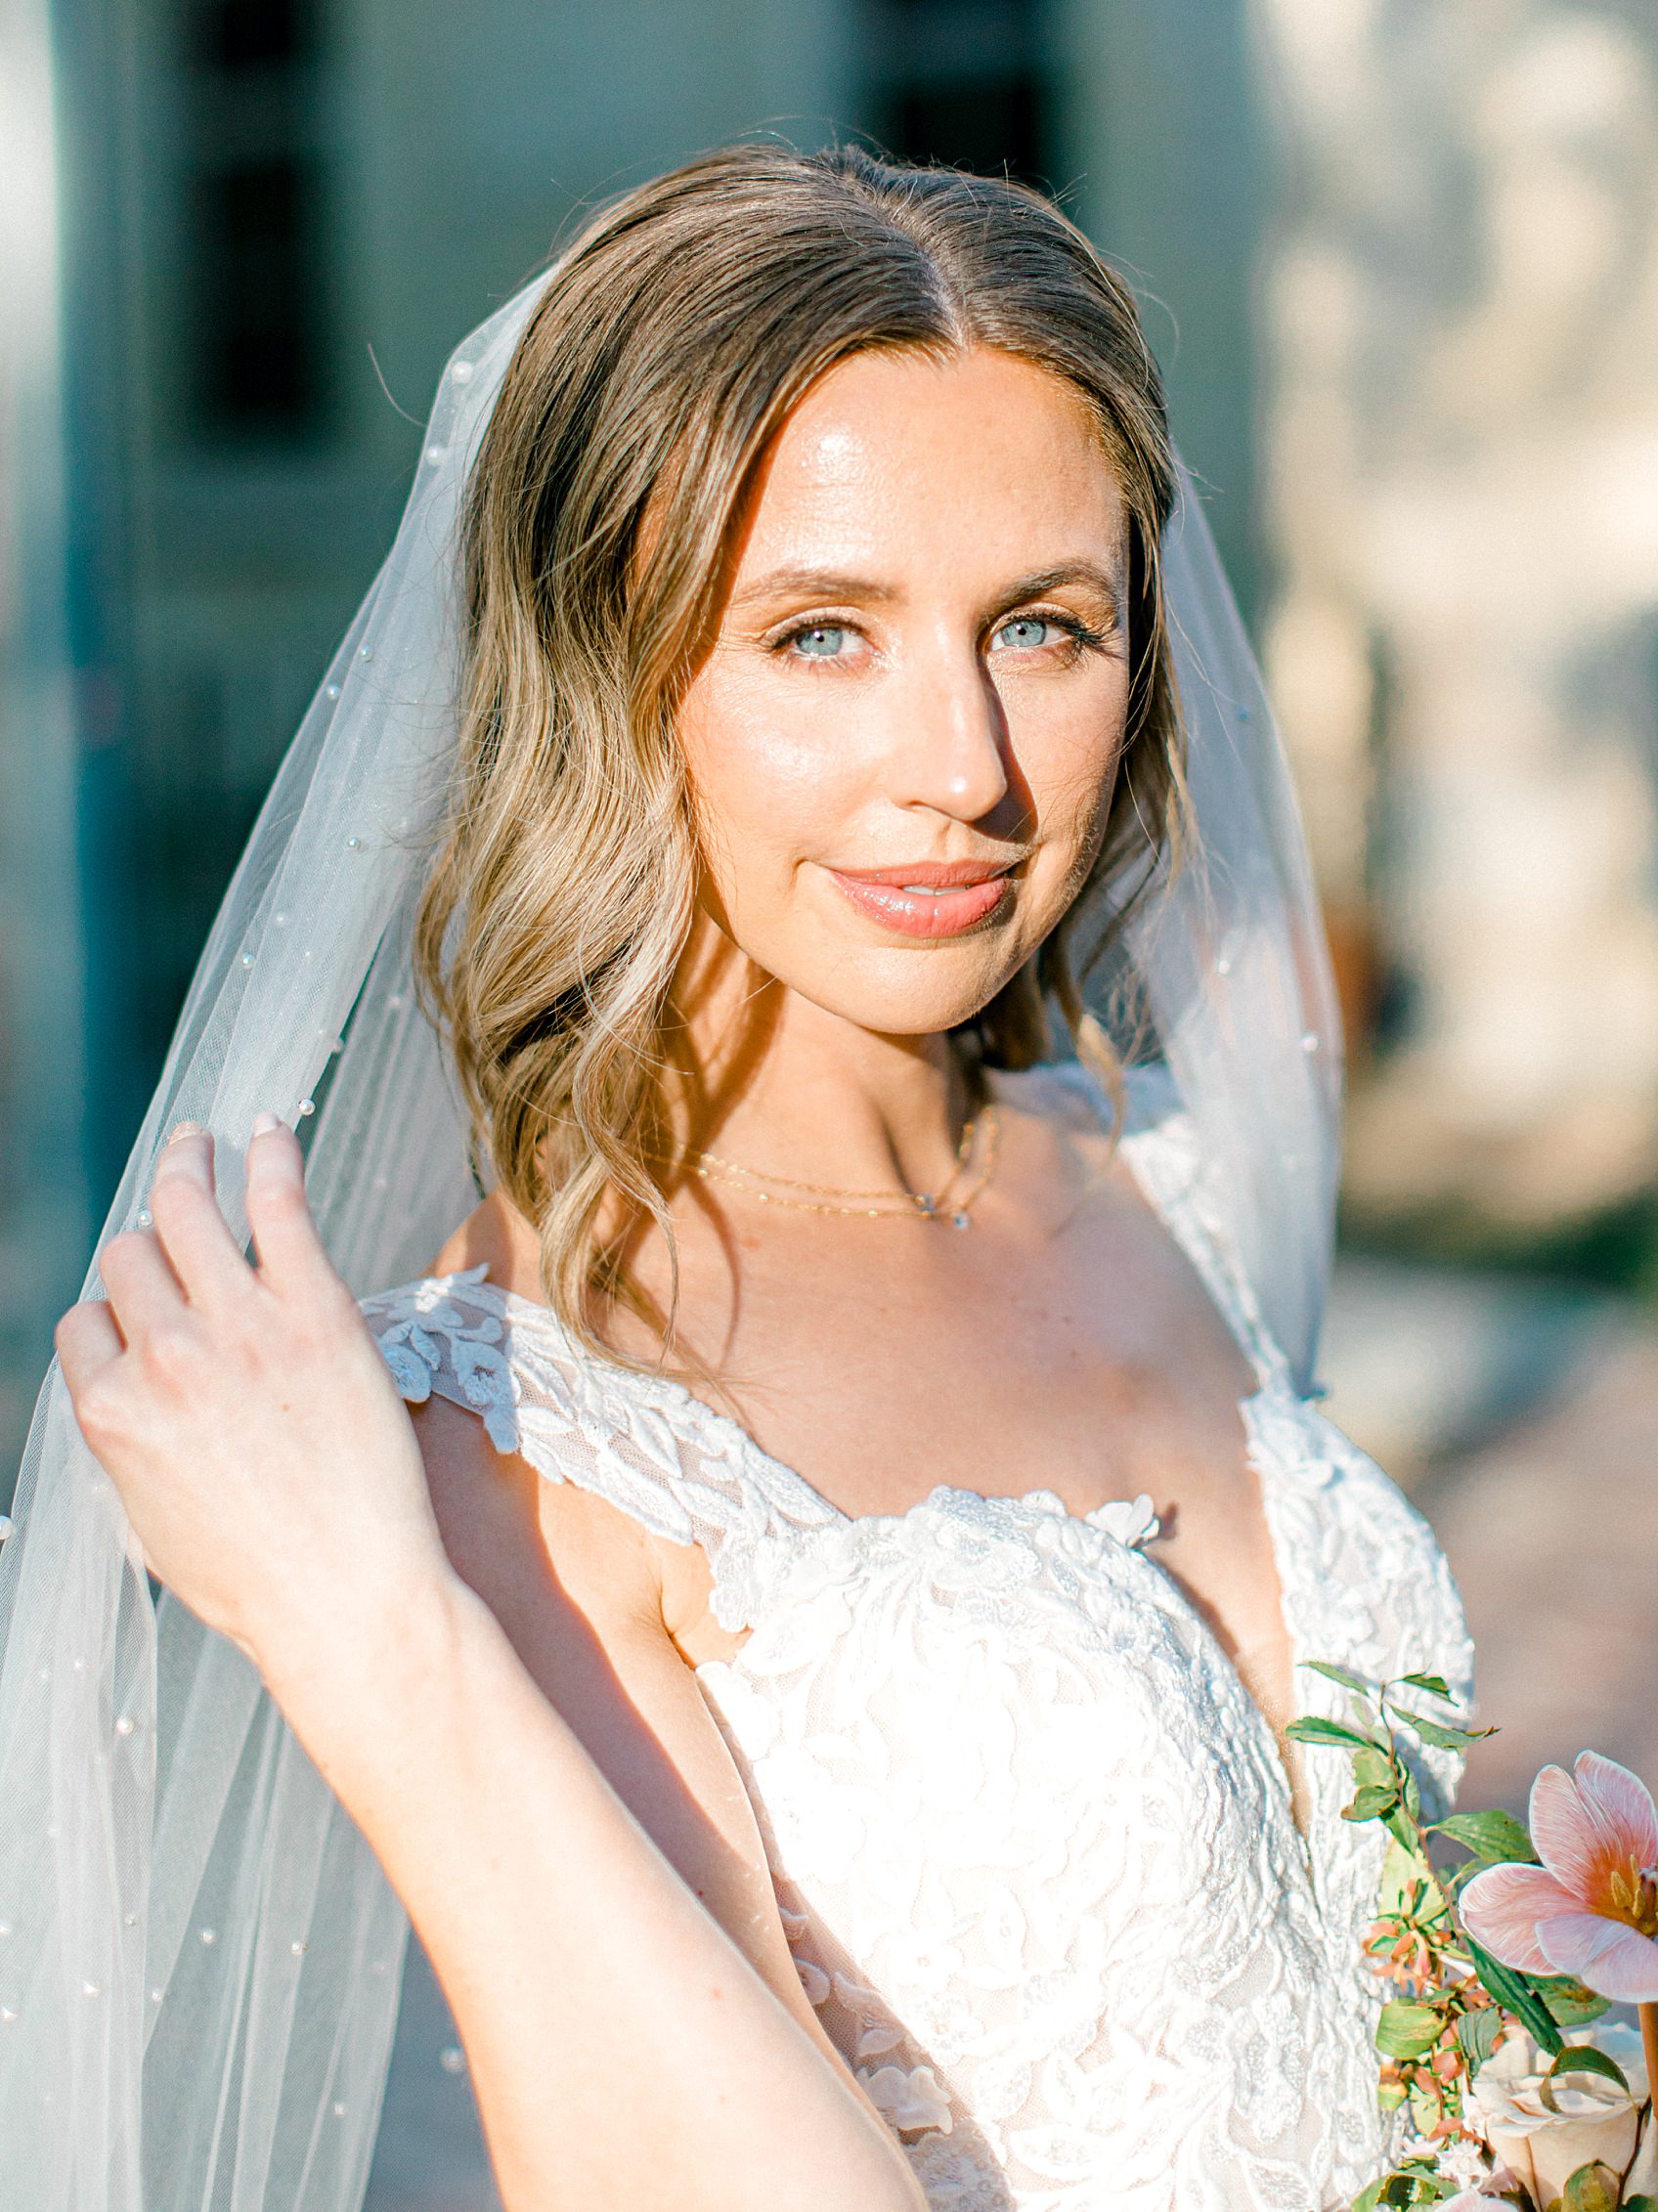 Downtown San Antonio Bridal Photography Session by Allison Jeffers Wedding Photography 0014